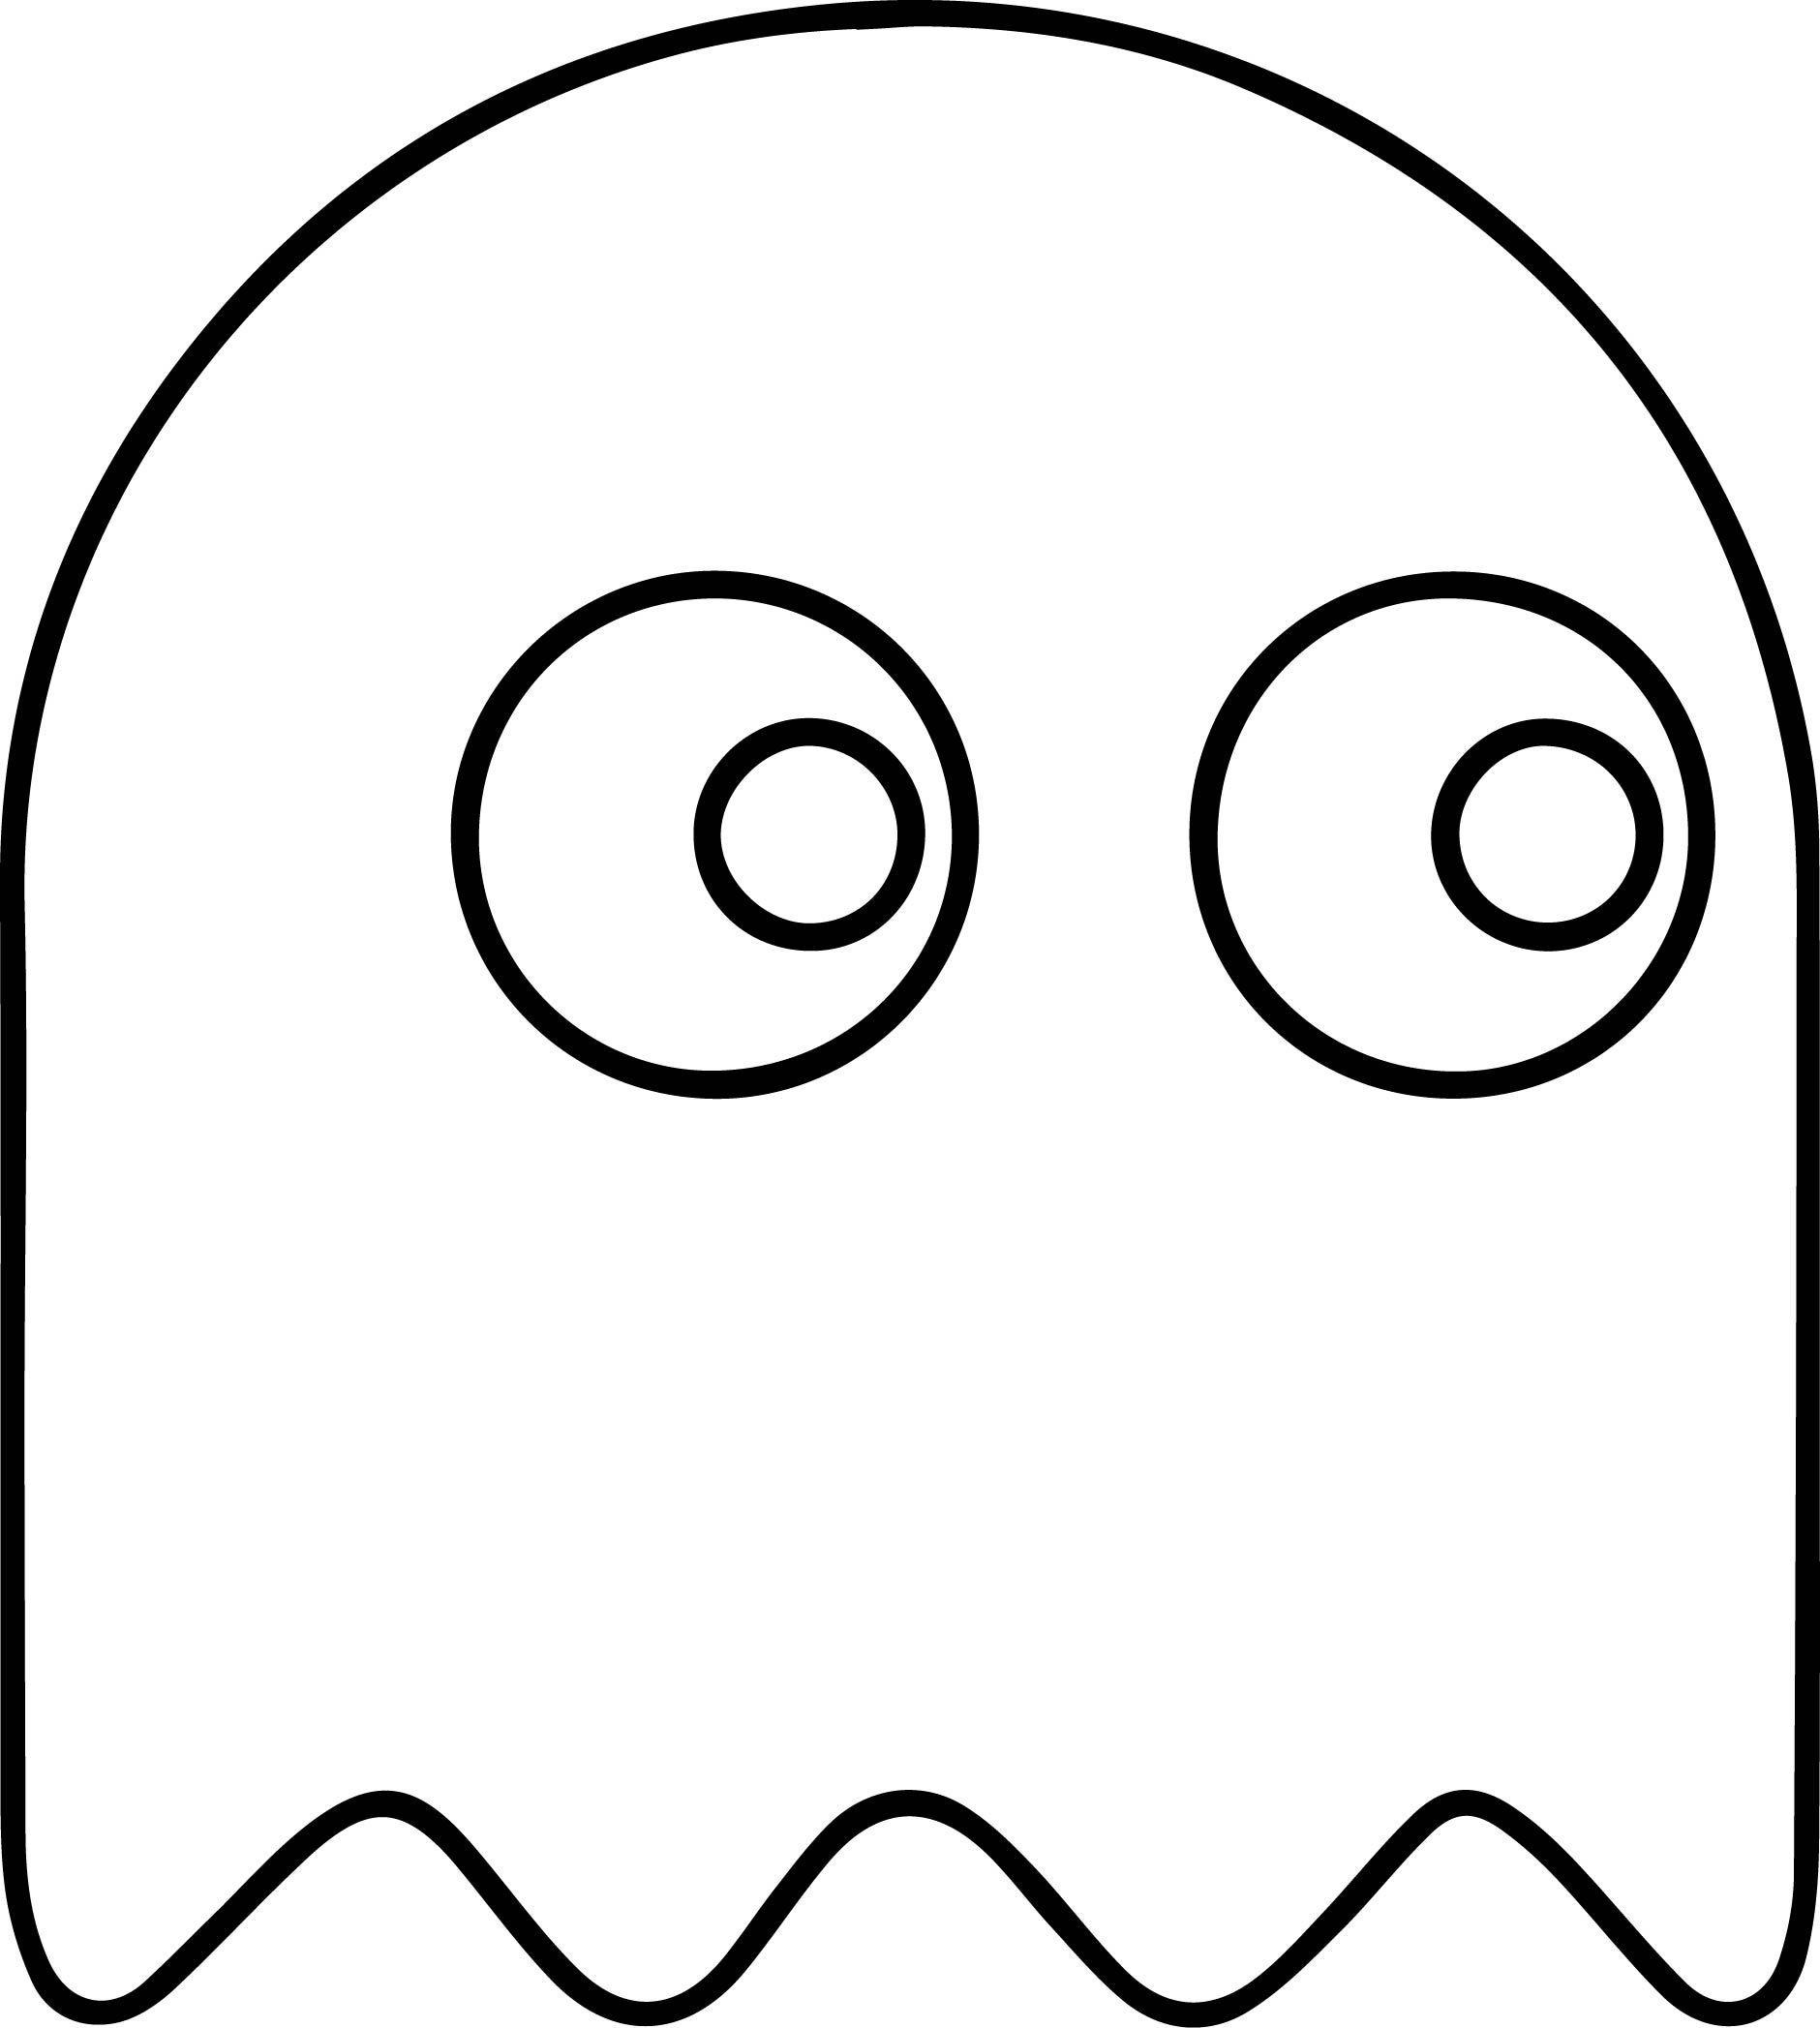 Pacman clipart line. Ghost drawing free download